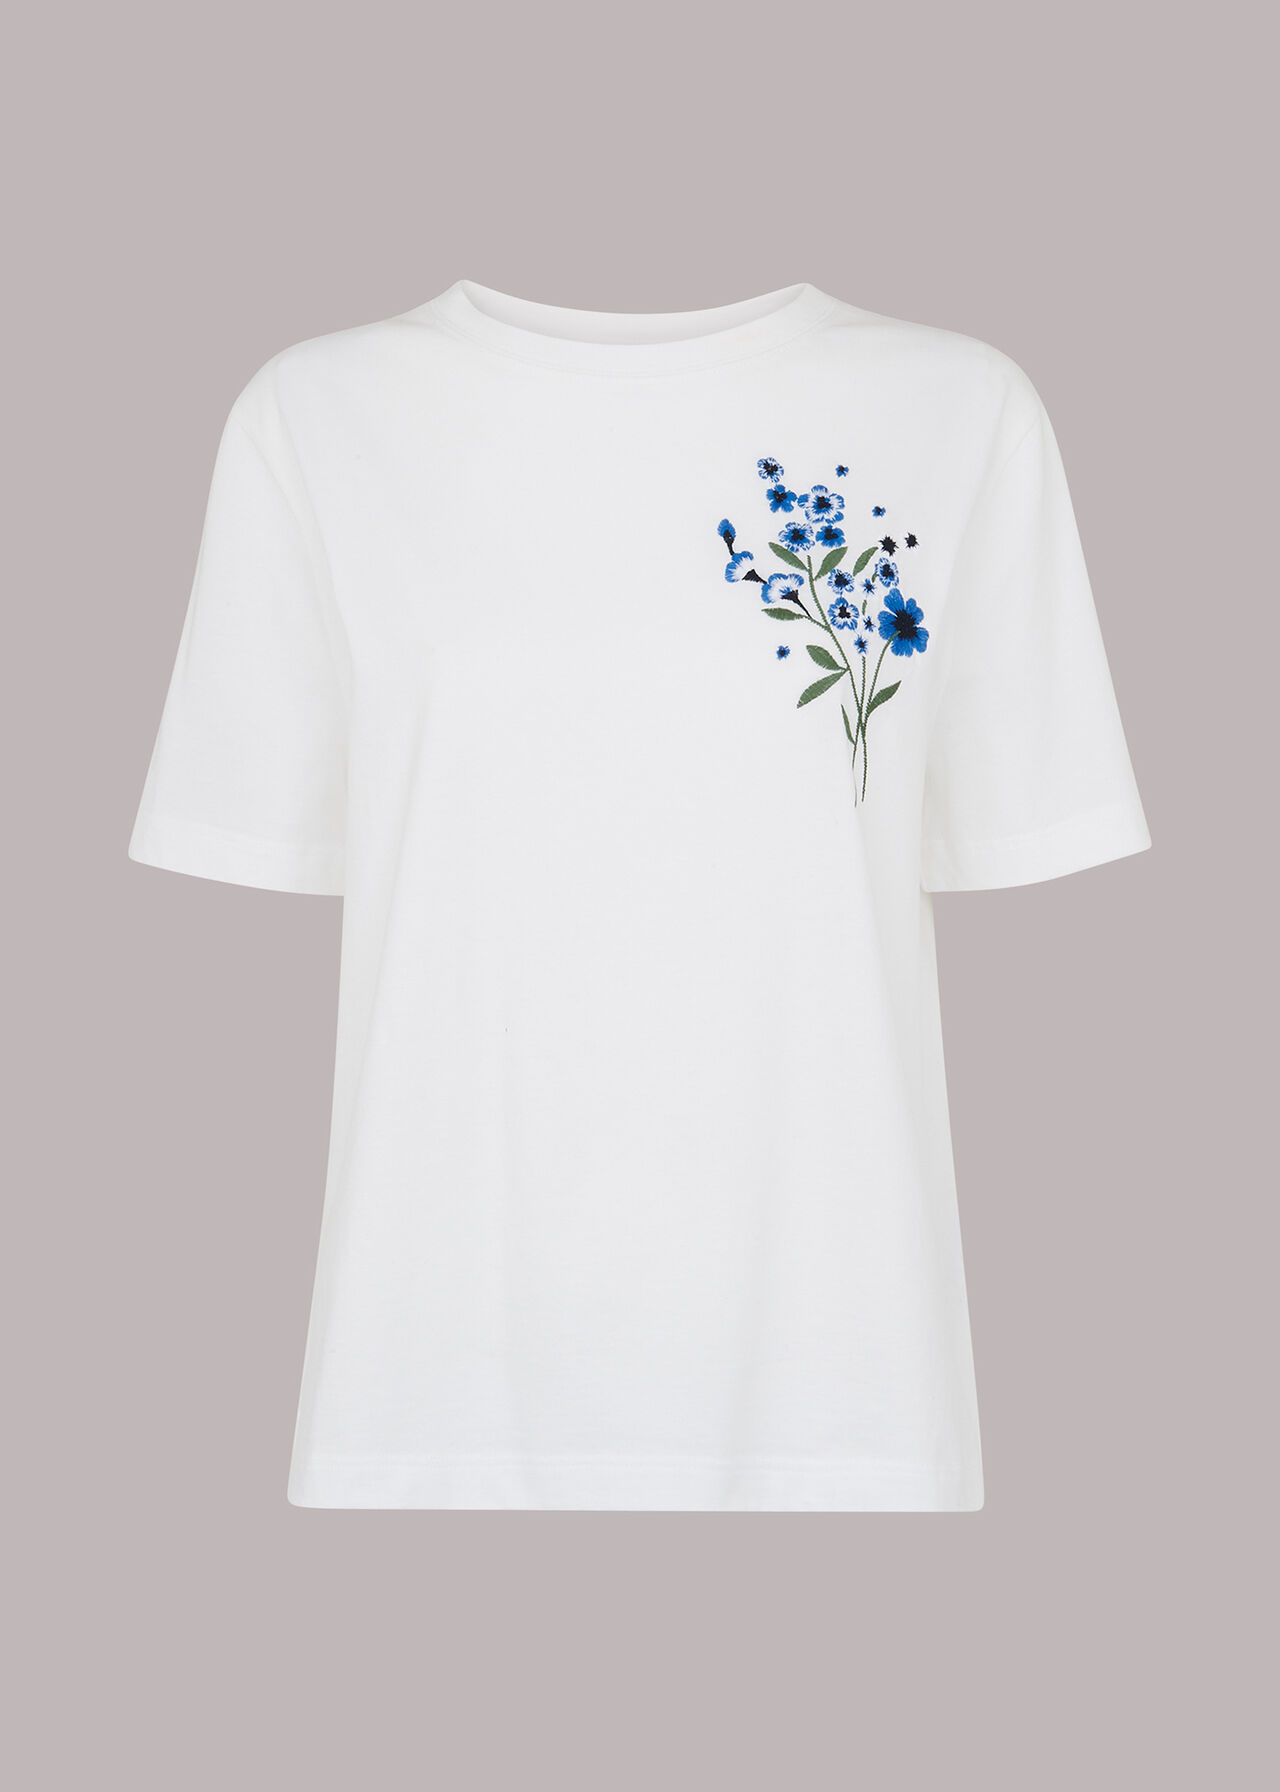 Embroidered Floral Tshirt